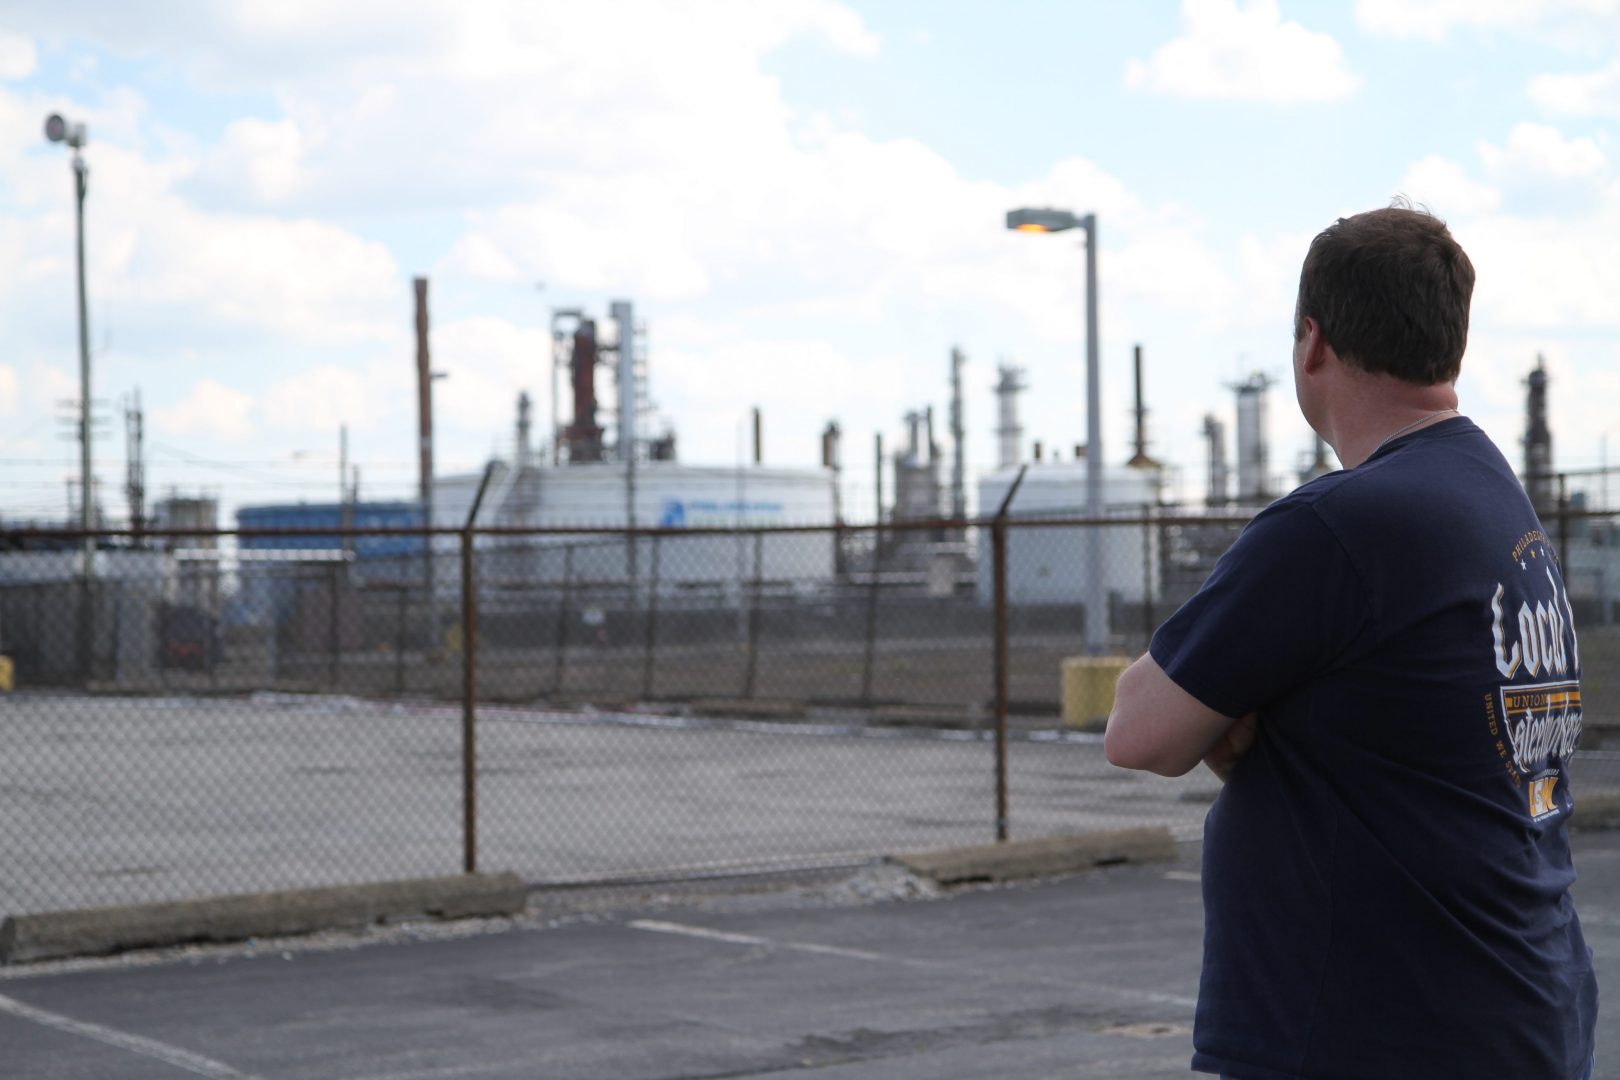 Ryan O’Callaghan is president of the United Steelworkers Local 10-1, which represents 640 union workers at Philadelphia Energy Solutions. The 150-year-old refinery is shutting down after a fire destroyed one of its units. 